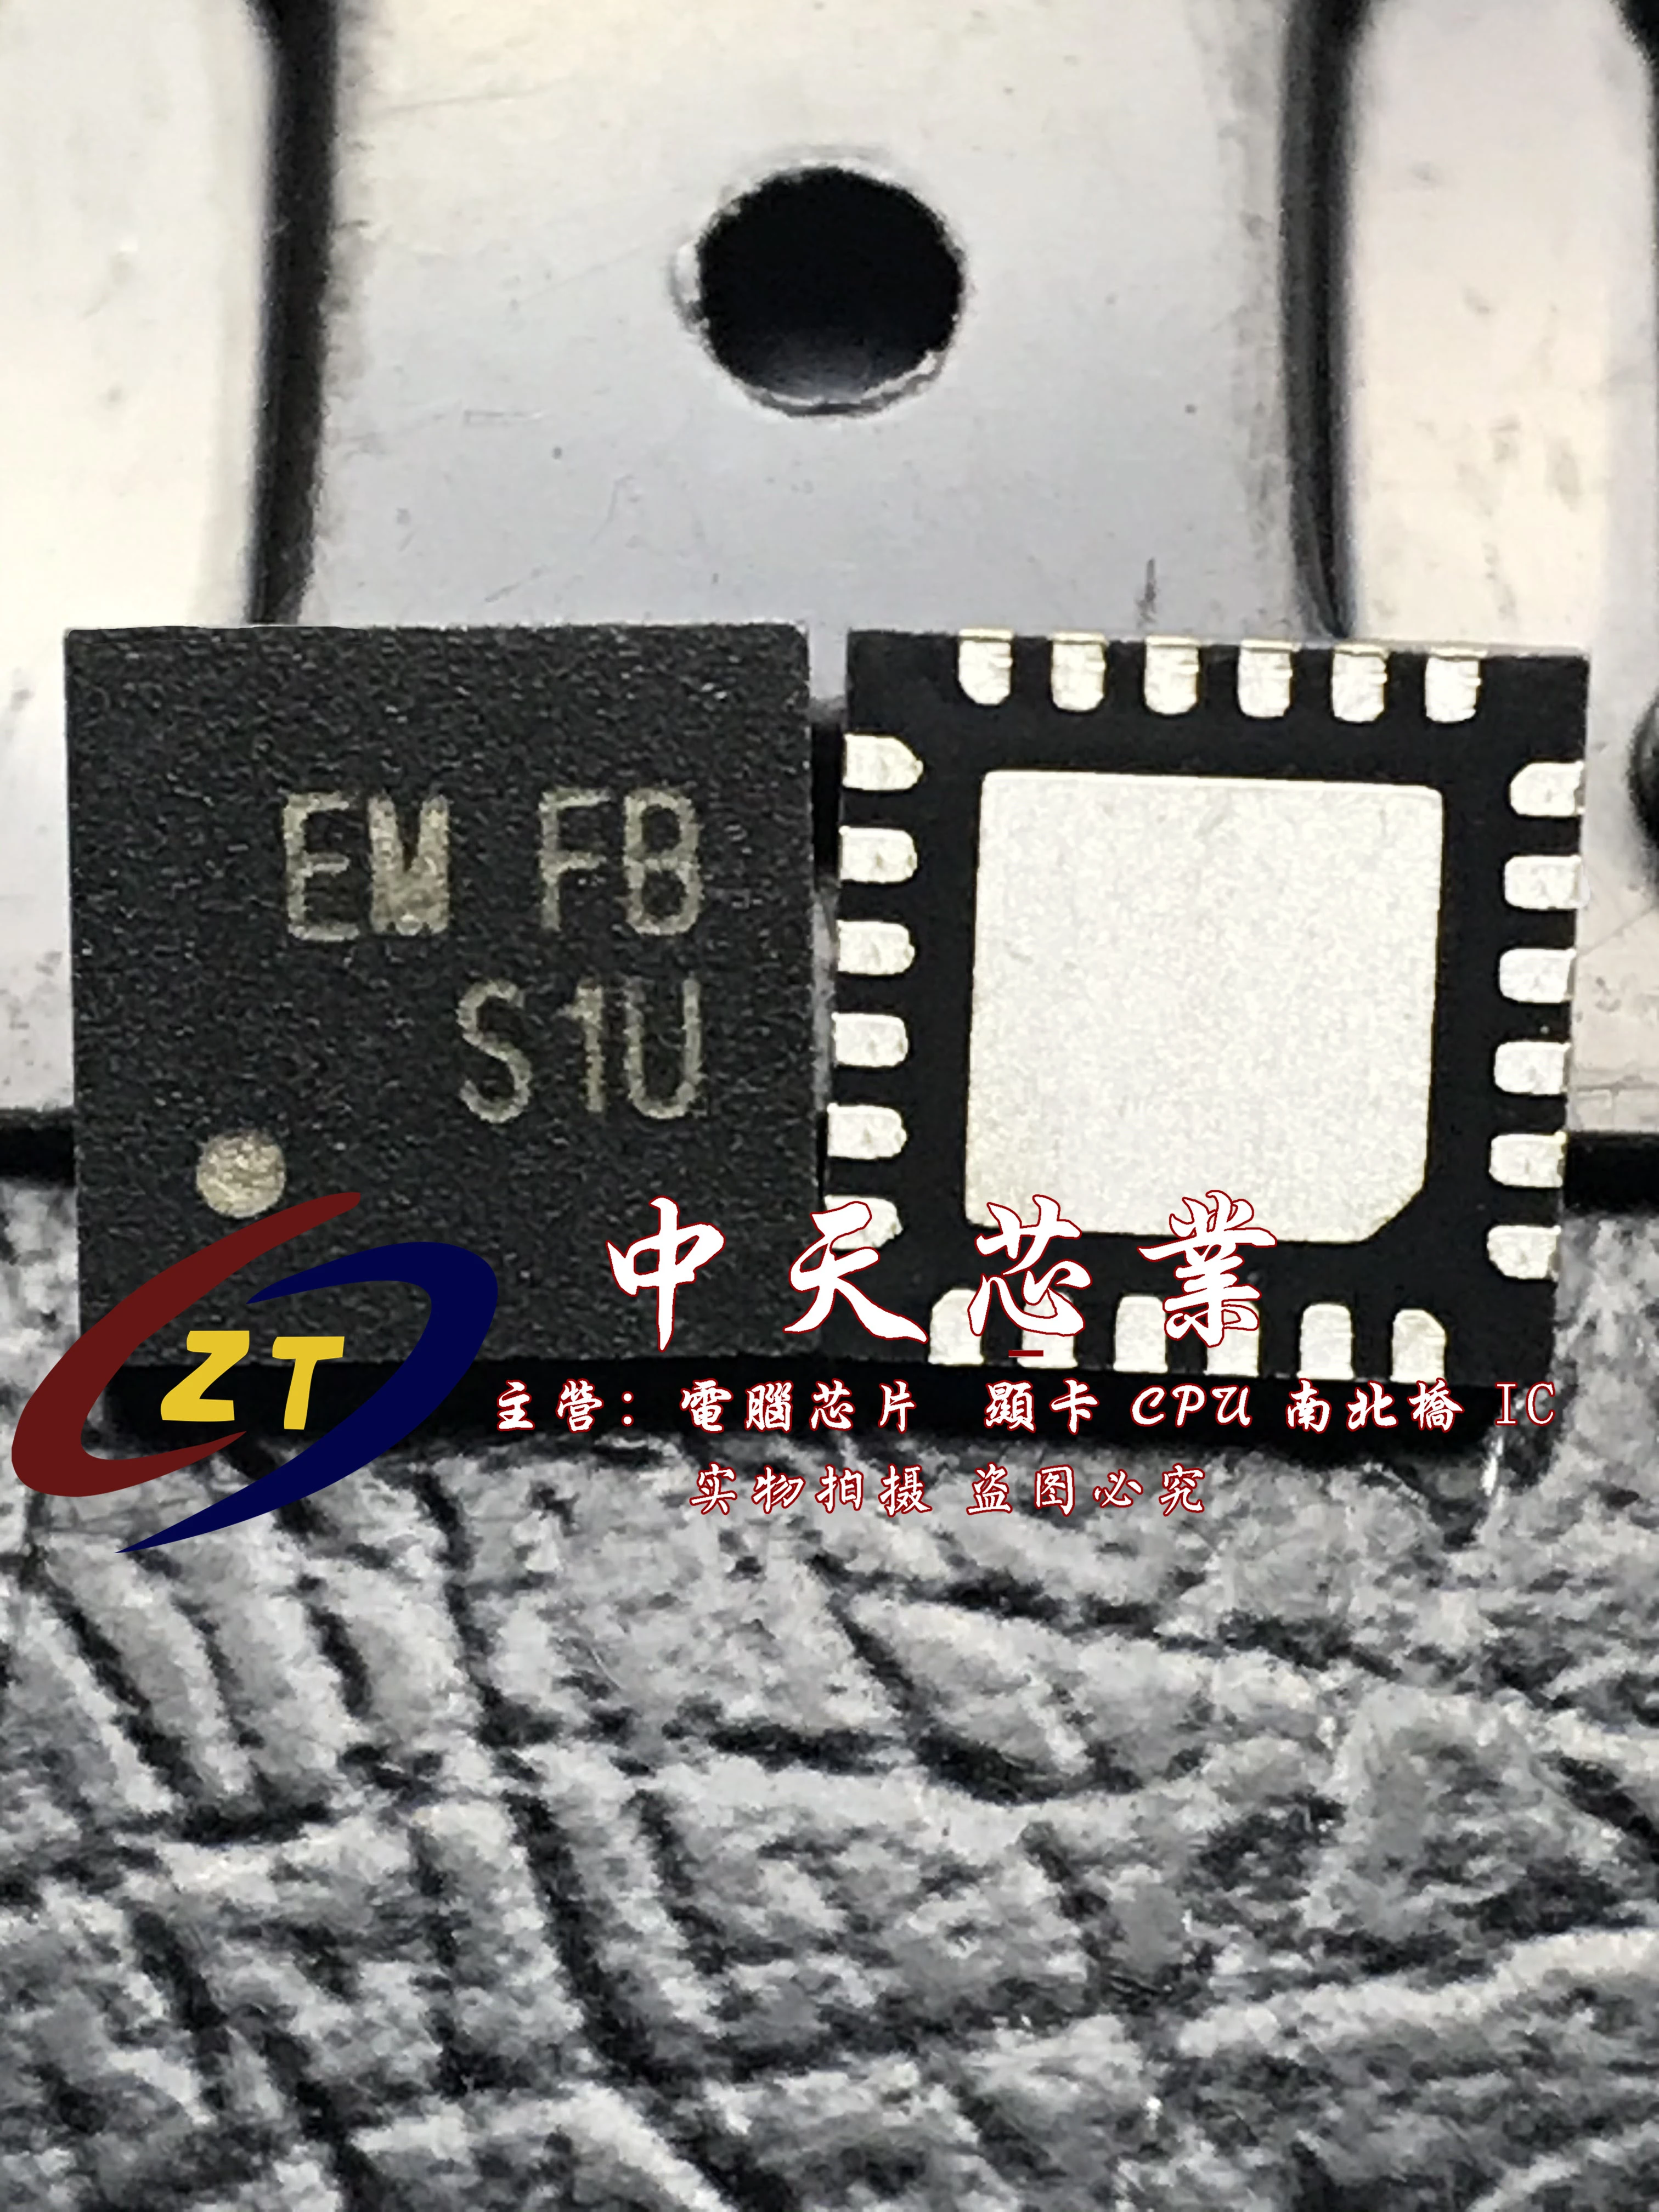 

5PCS/lot RT8205LGQW RT8205LZQW RT8205L (EM EC EM DA,EM DB,EM...) QFN-24 100% new imported original IC Chips fast delivery